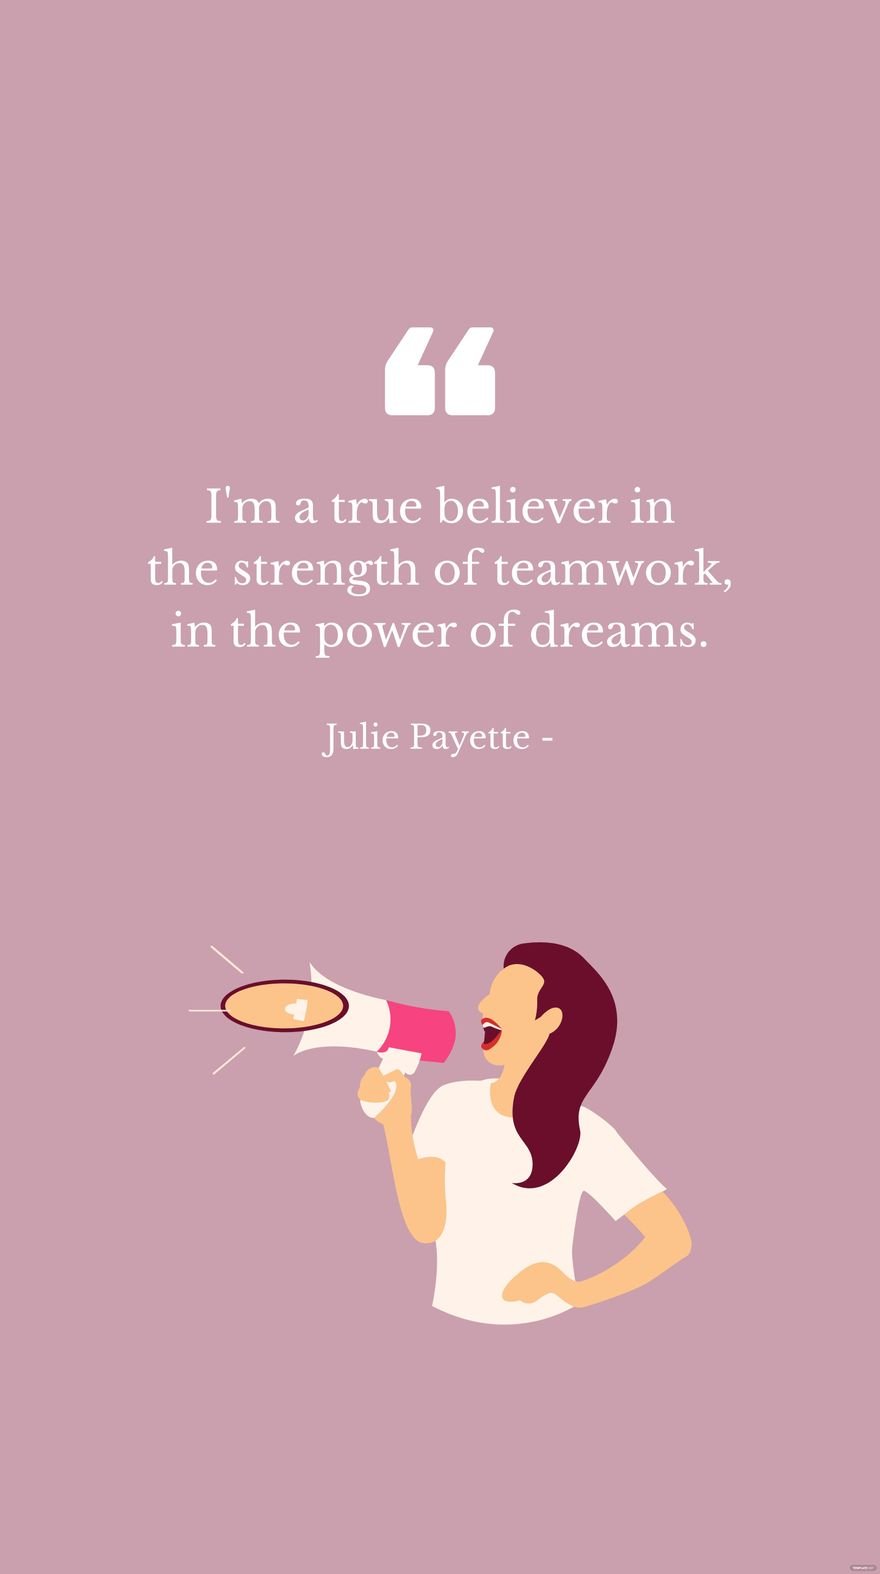 Julie Payette - I'm a true believer in the strength of teamwork, in the power of dreams. in JPG